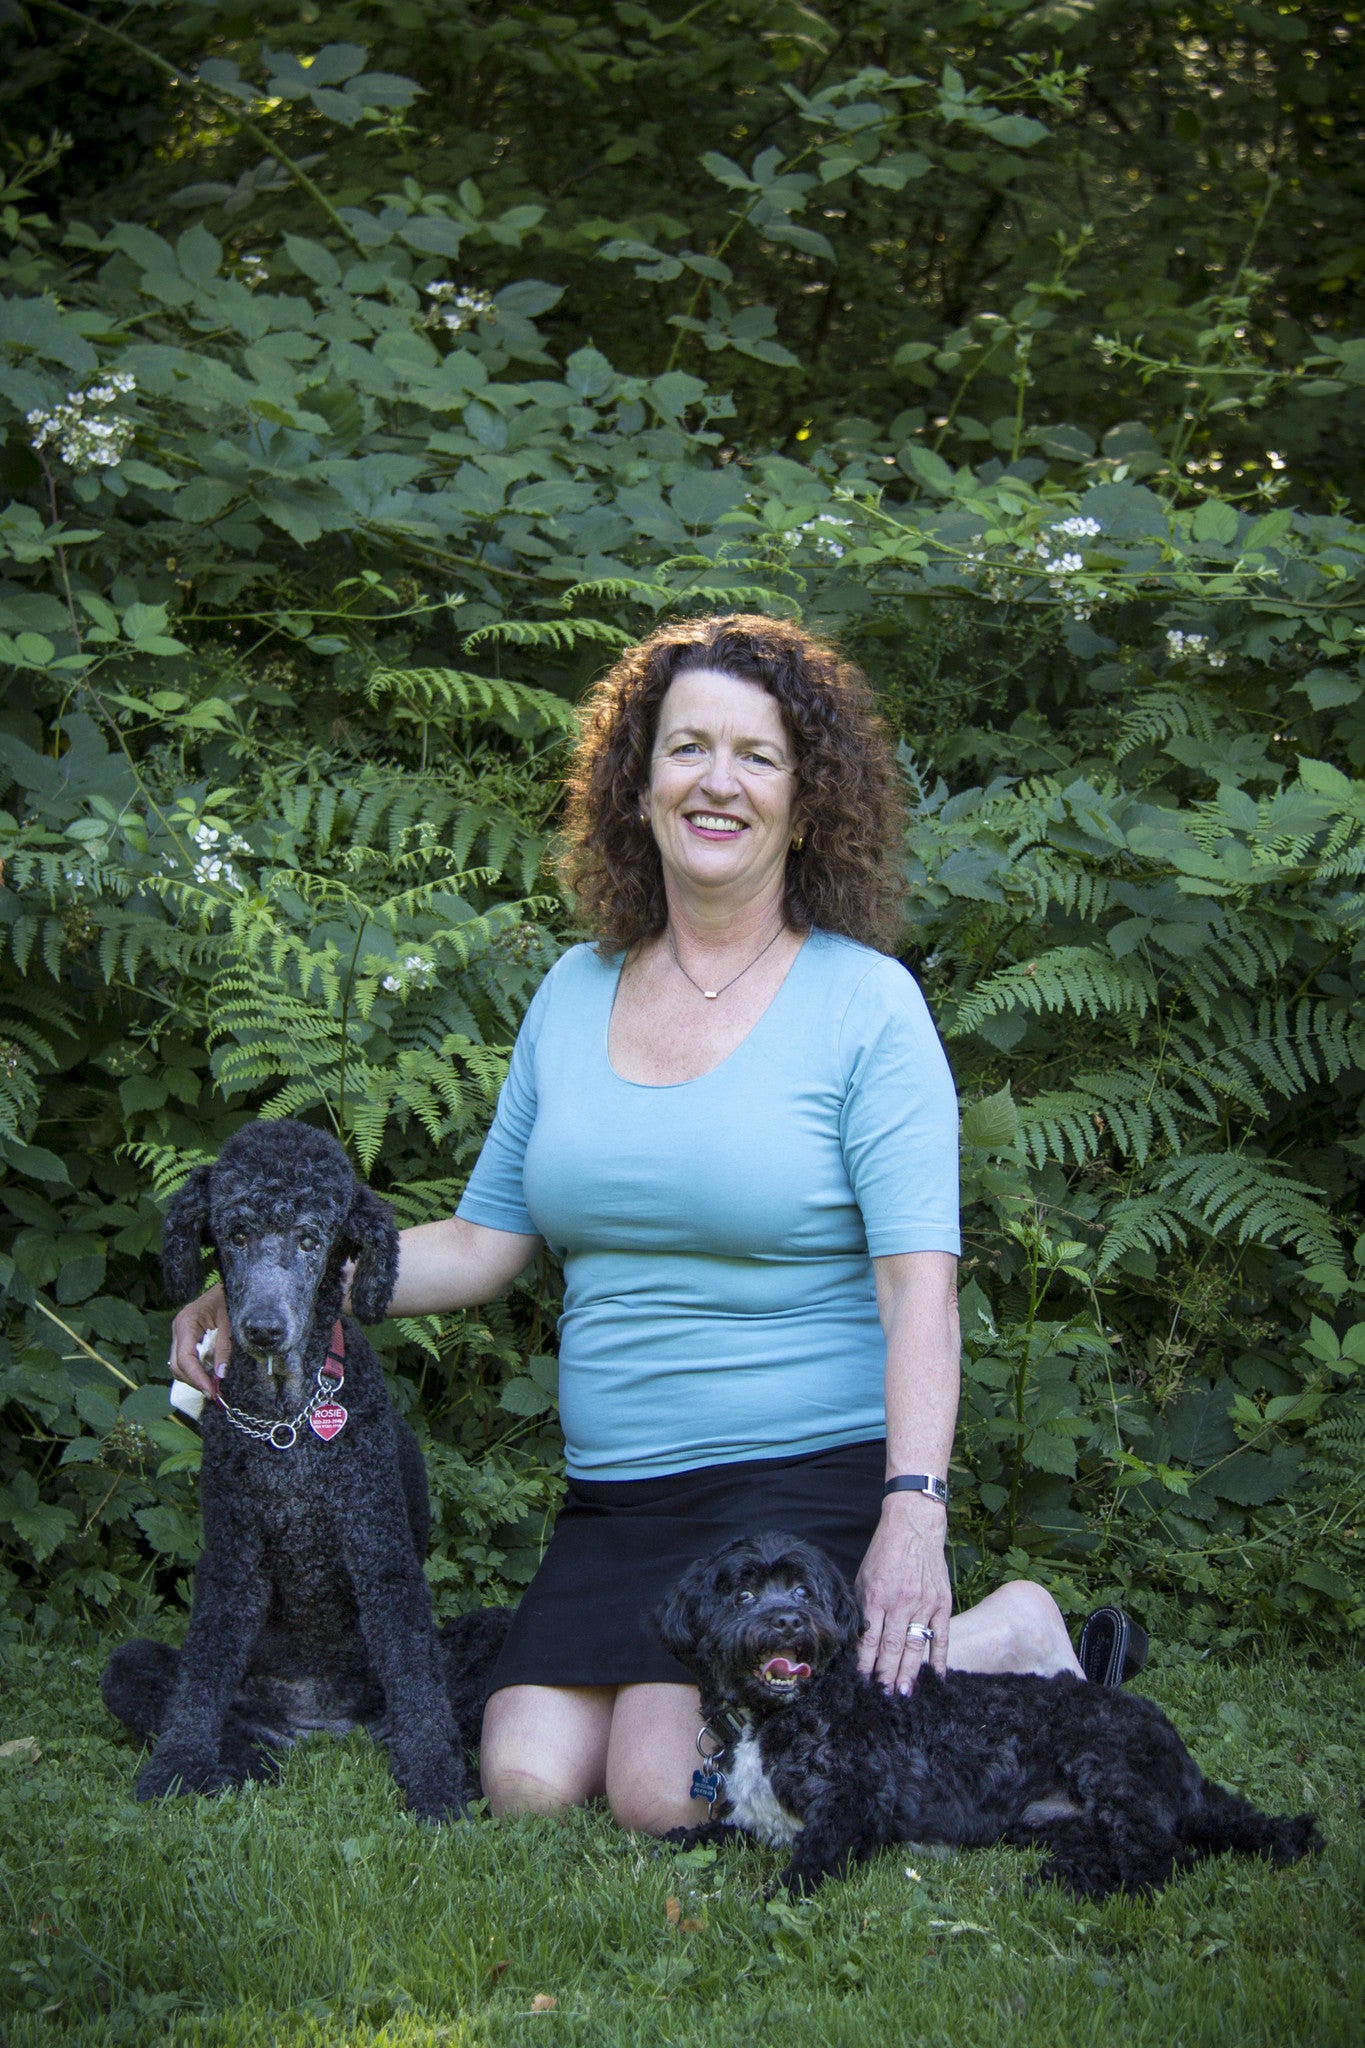 From Picky Eater To Top Dog: The Portland Pet Food Company Story